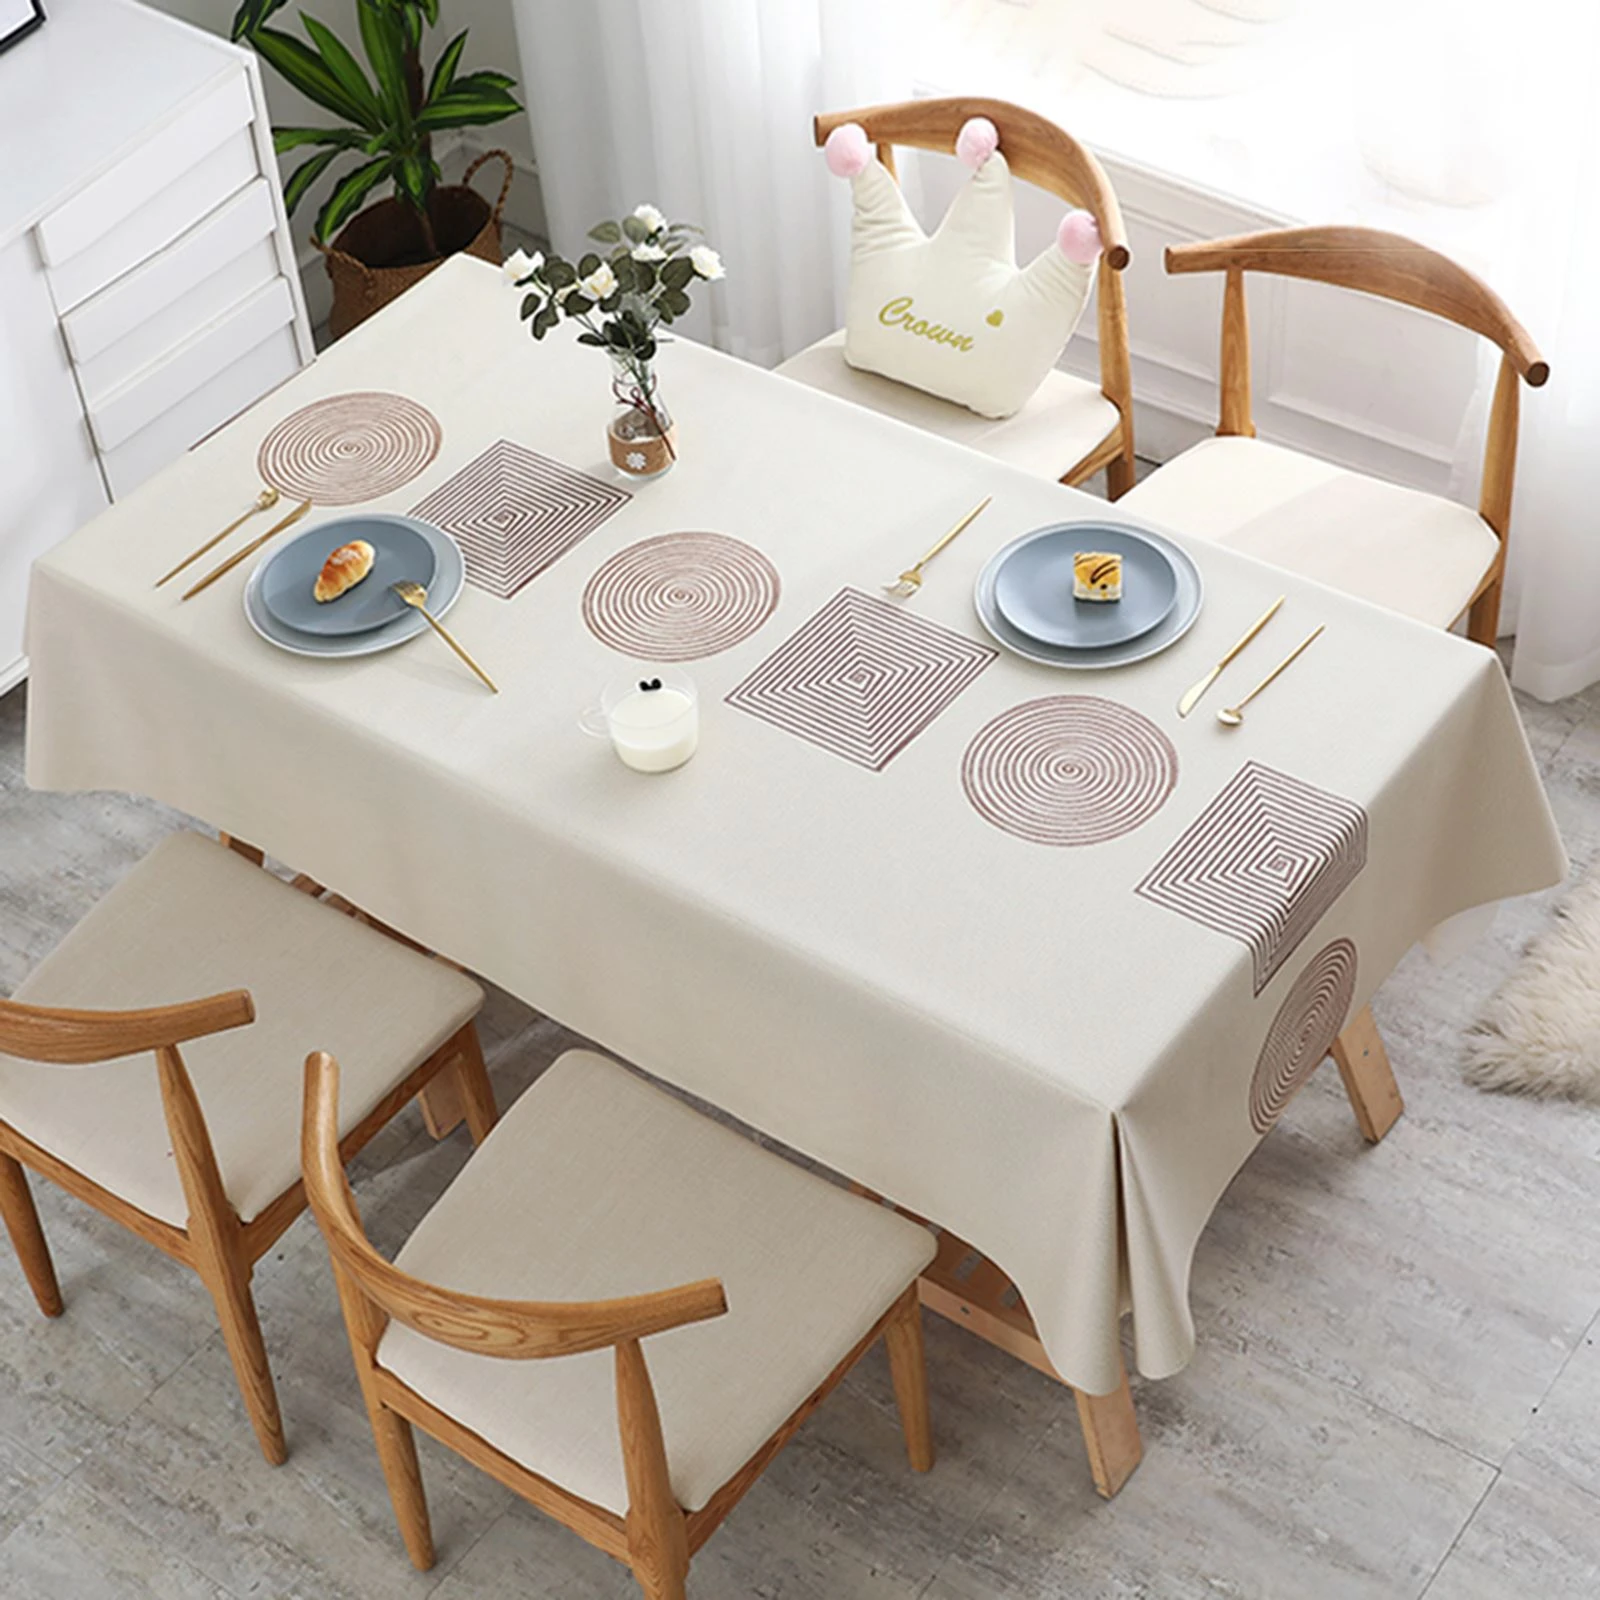 Wipe Clean Tablecloth Protector Table Cloth Cover Waterproof Dining Kitchen Home